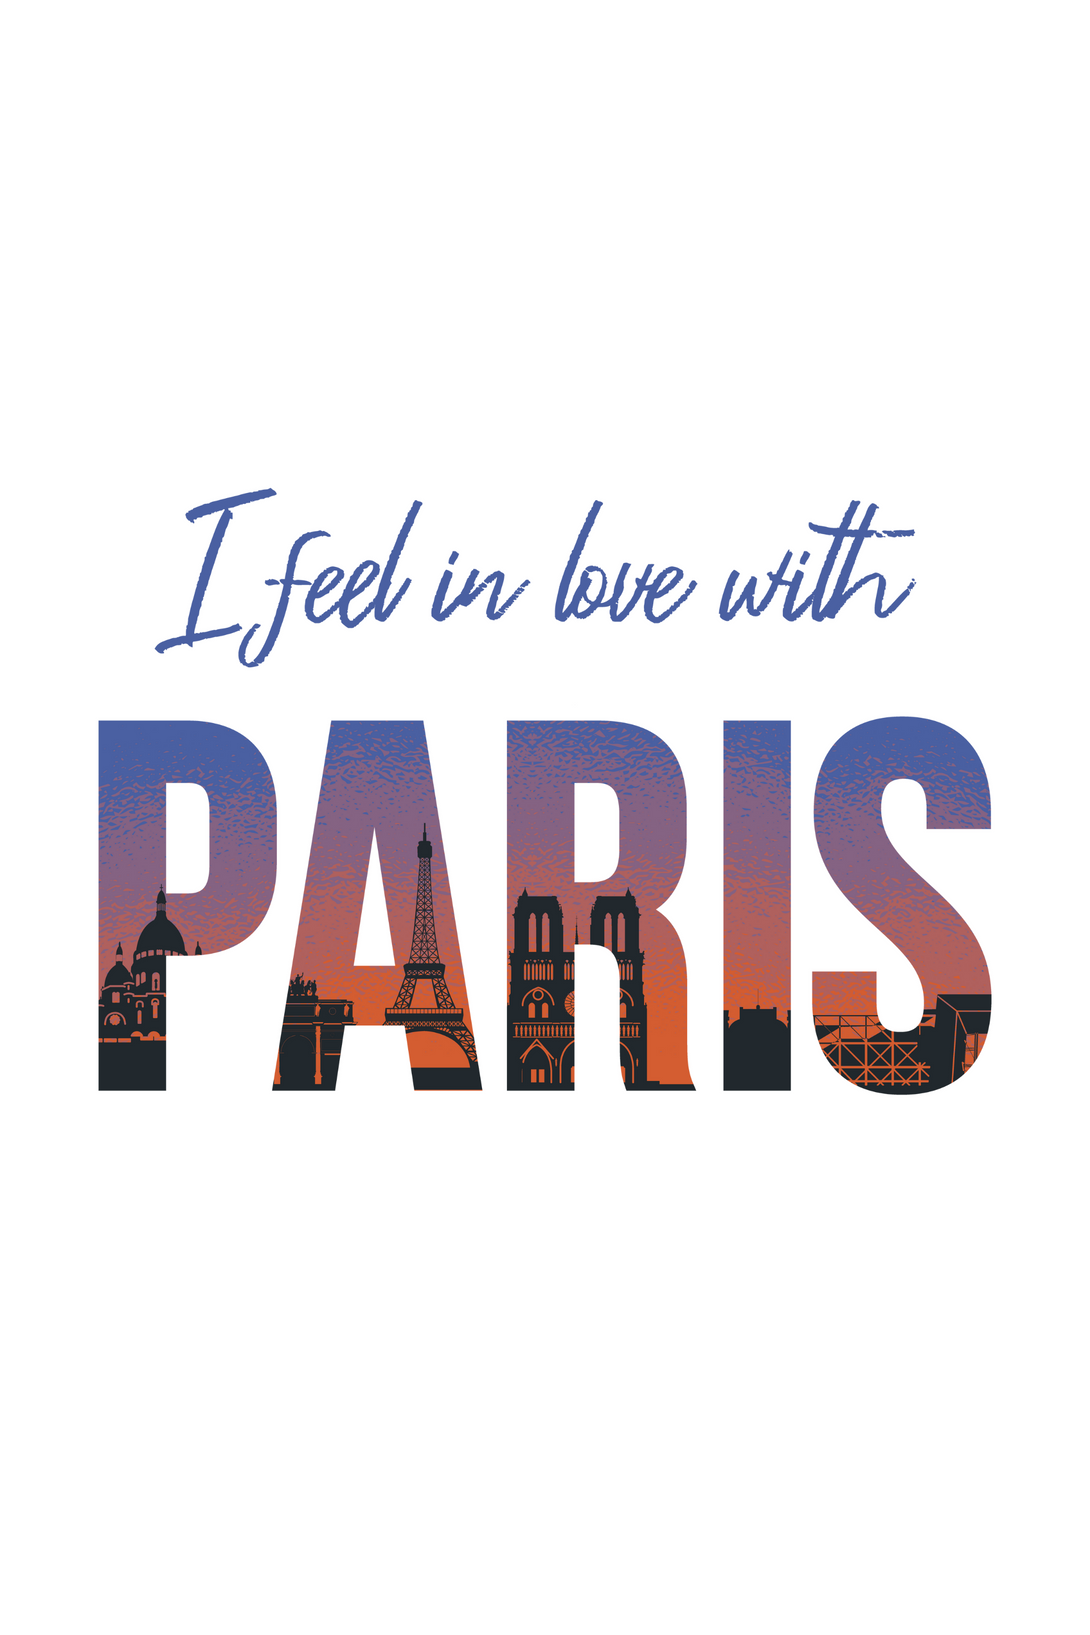 In Love With Paris Printed T-Shirt For Men - WowWaves - 1